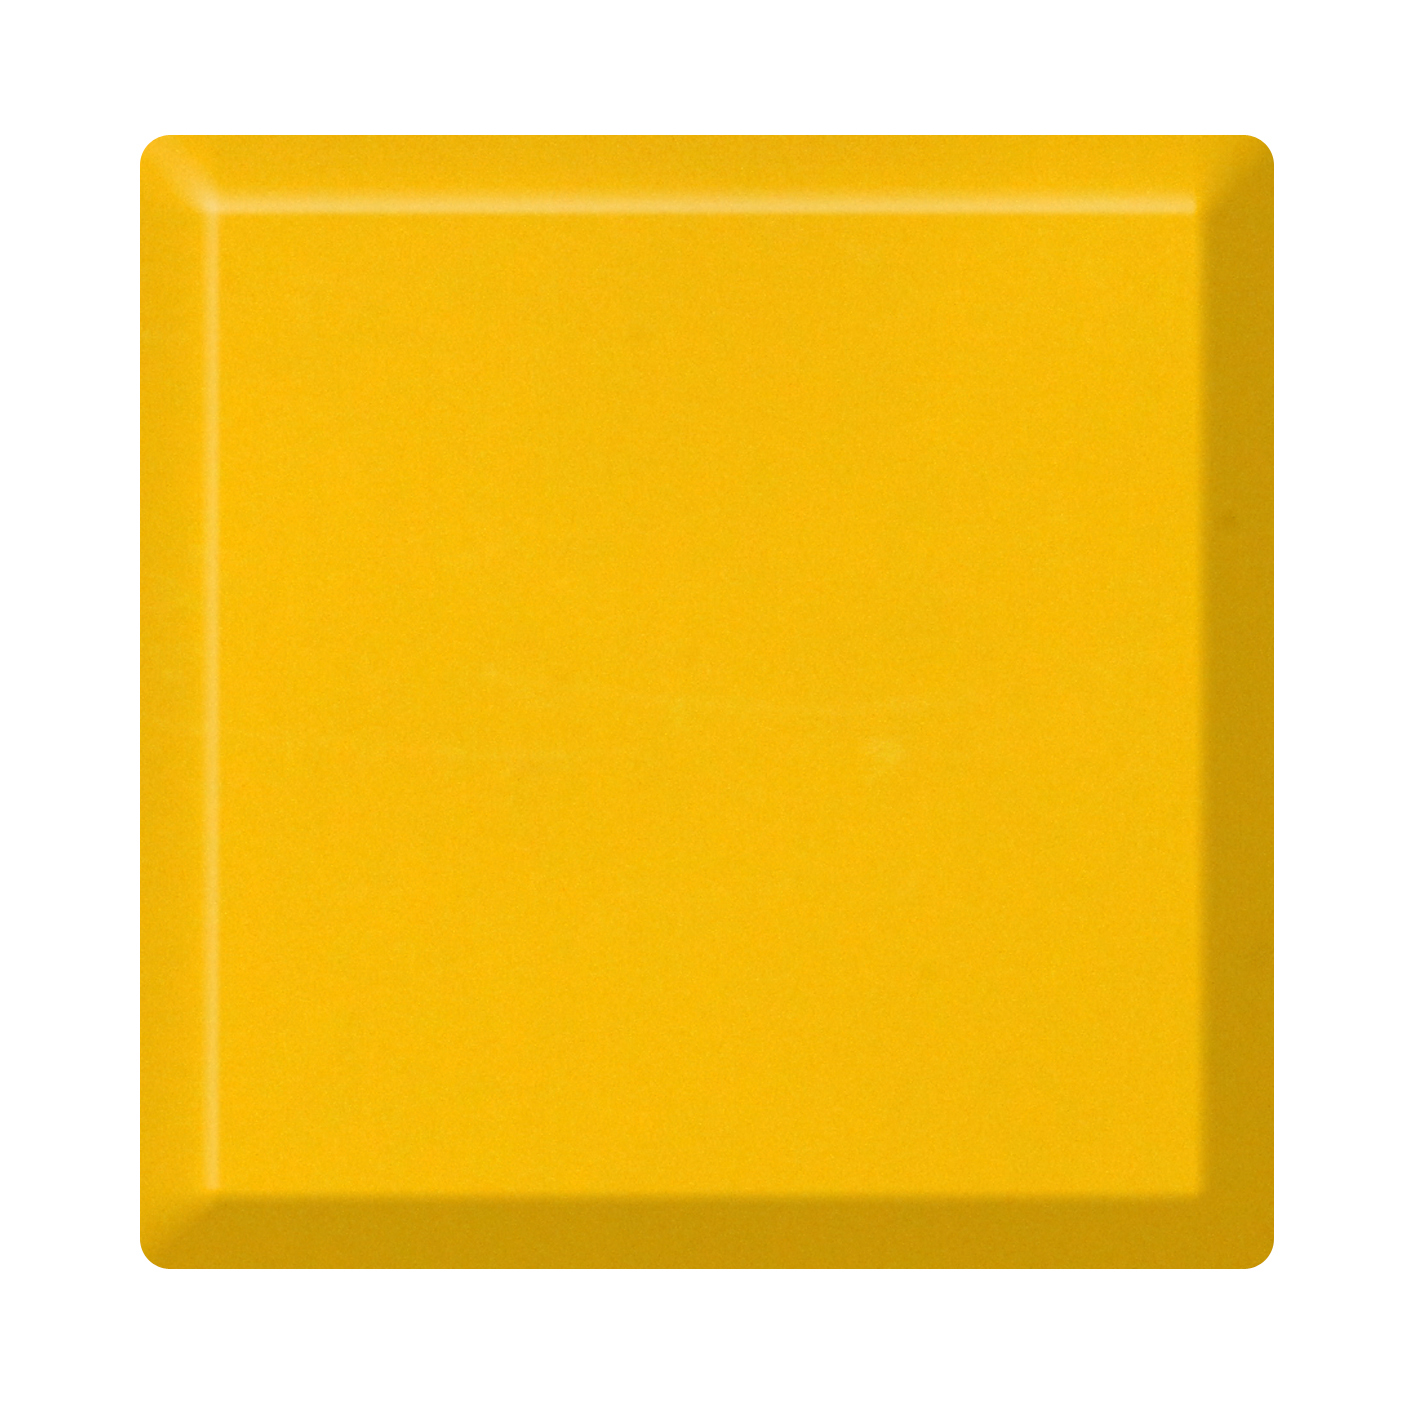 Yellow acrylic solid surface material